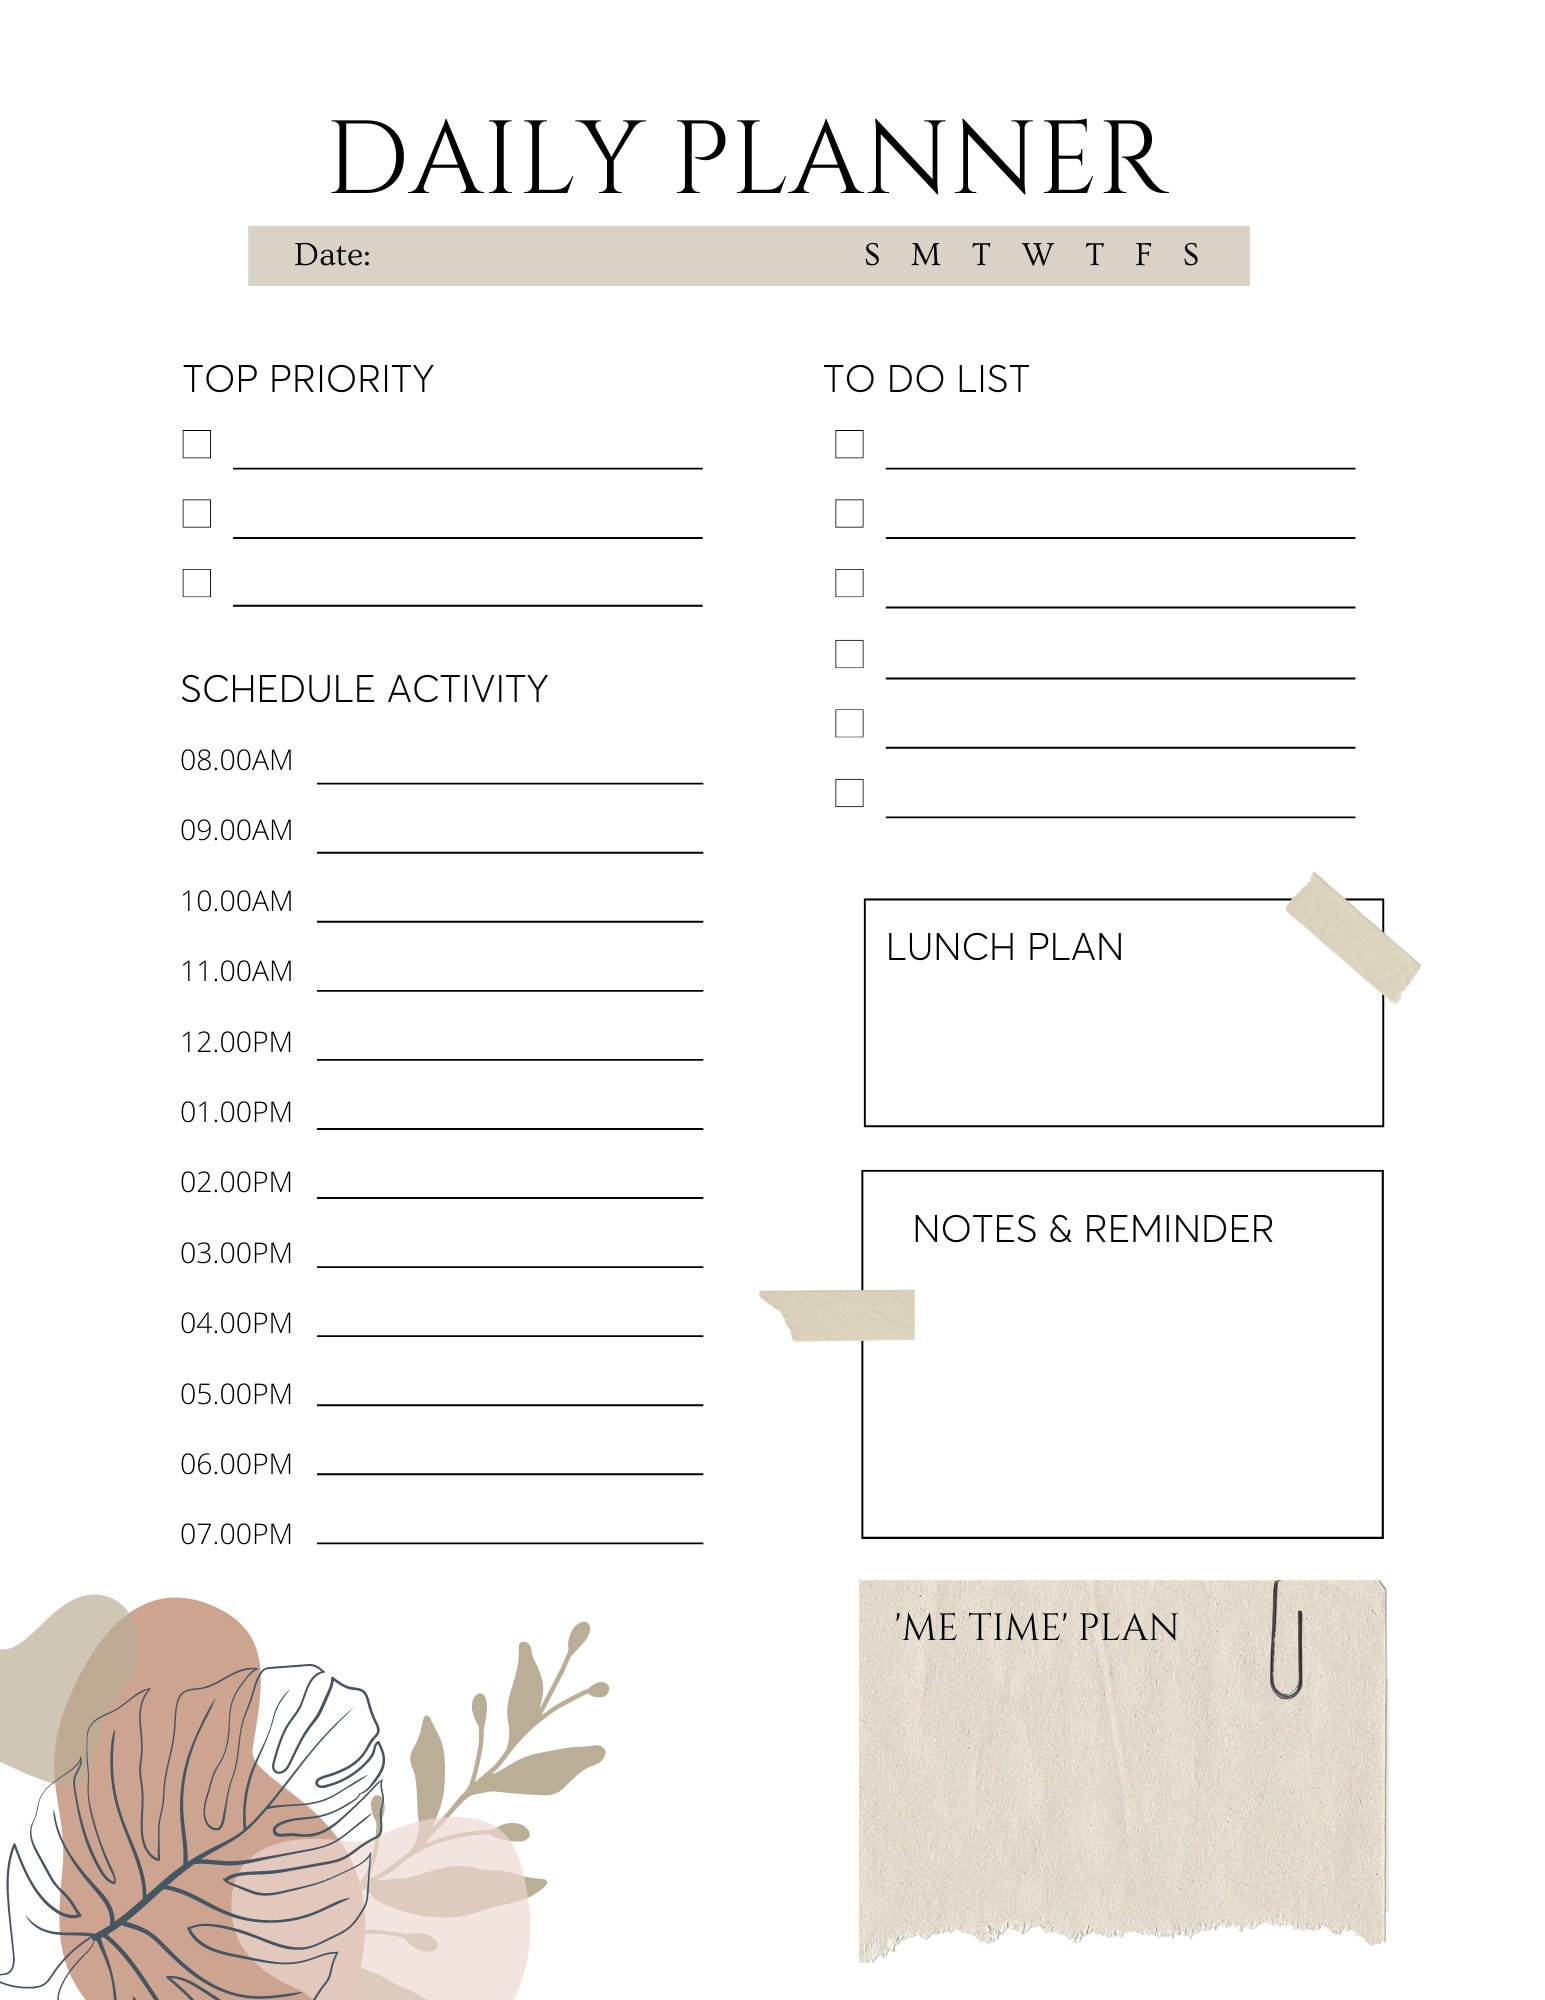 Aesthetic Daily Printable Planner in Neutral Colors - Etsy